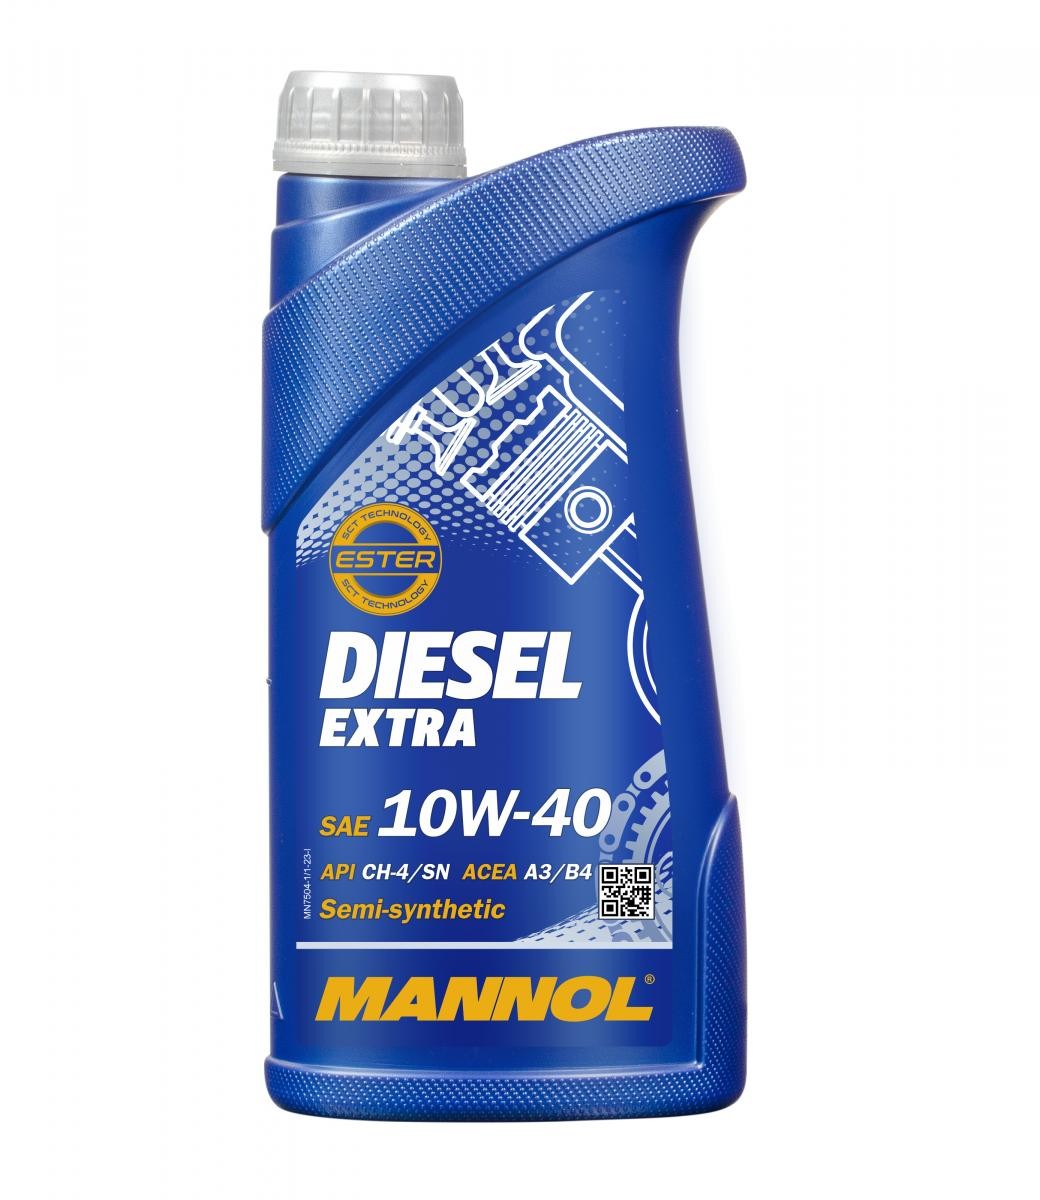 MANNOL DIESEL EXTRA MN7504-1 Engine oil 10W-40, 1l, Part Synthetic Oil